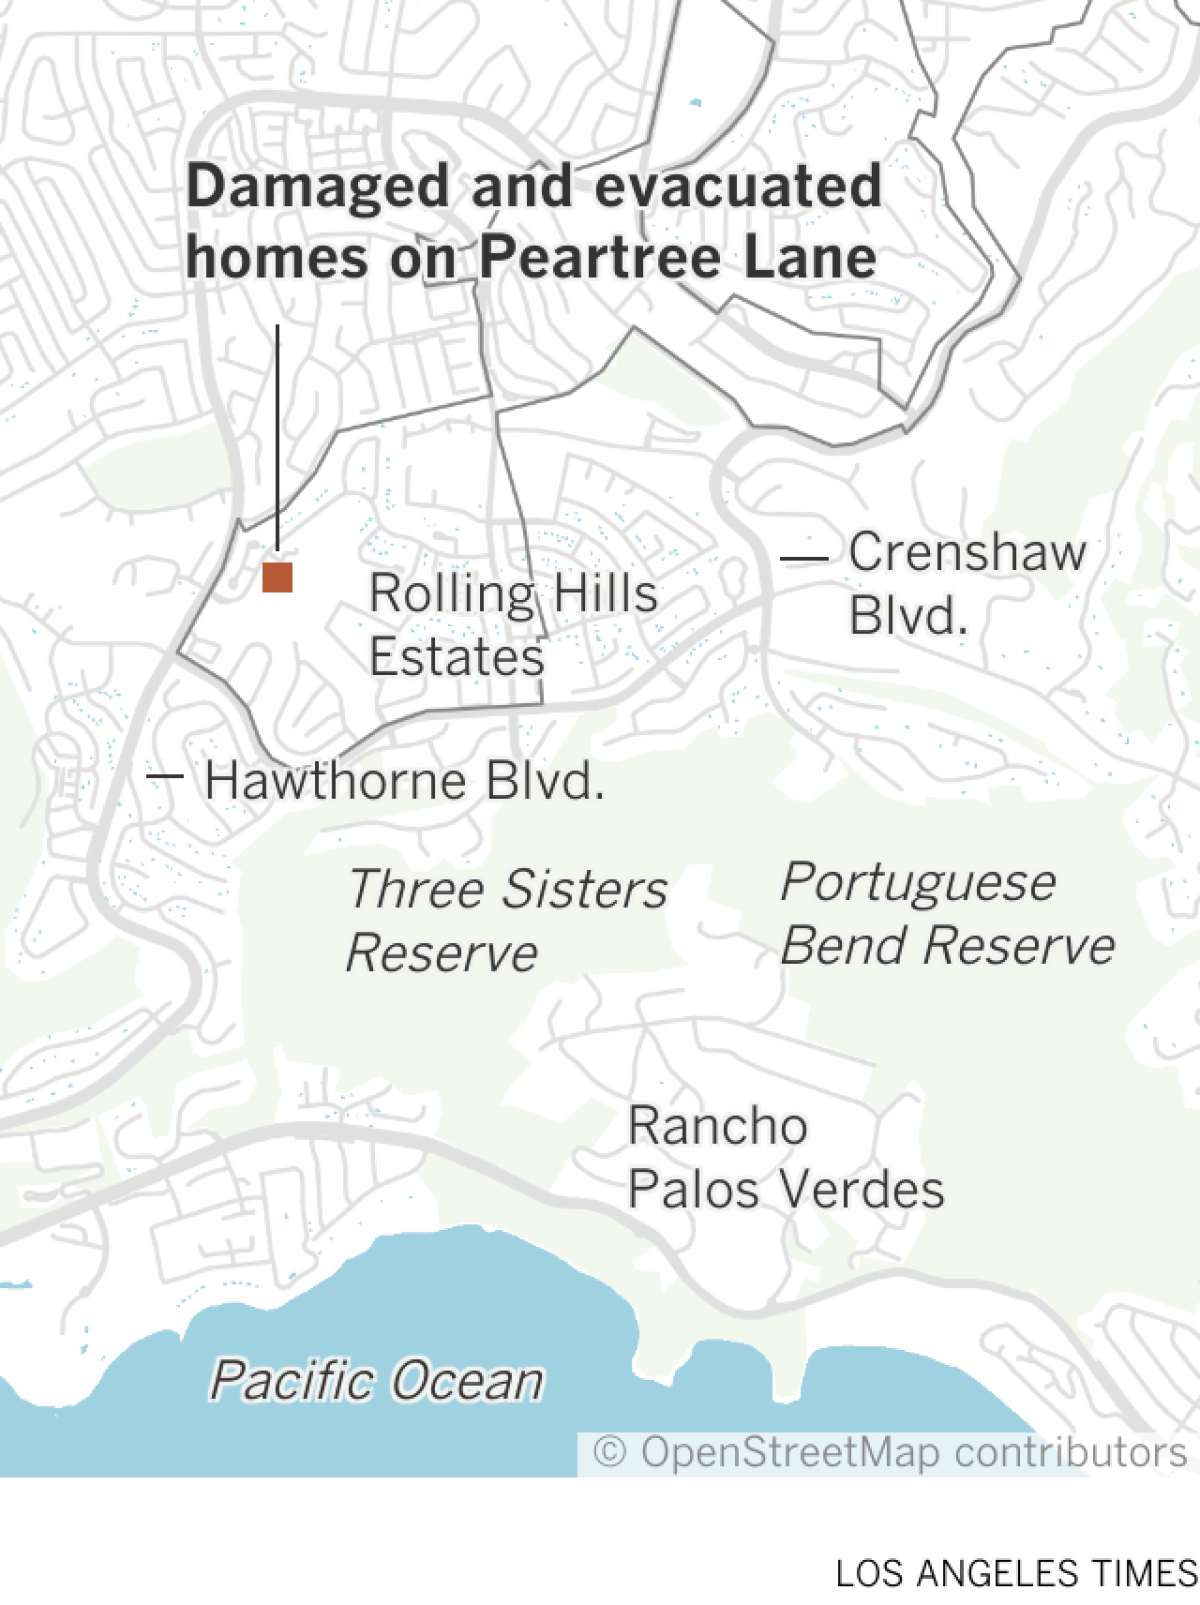 Map showing the location of Peartree Lane in Rolling Hills Estates, where homes are sliding into a ravine